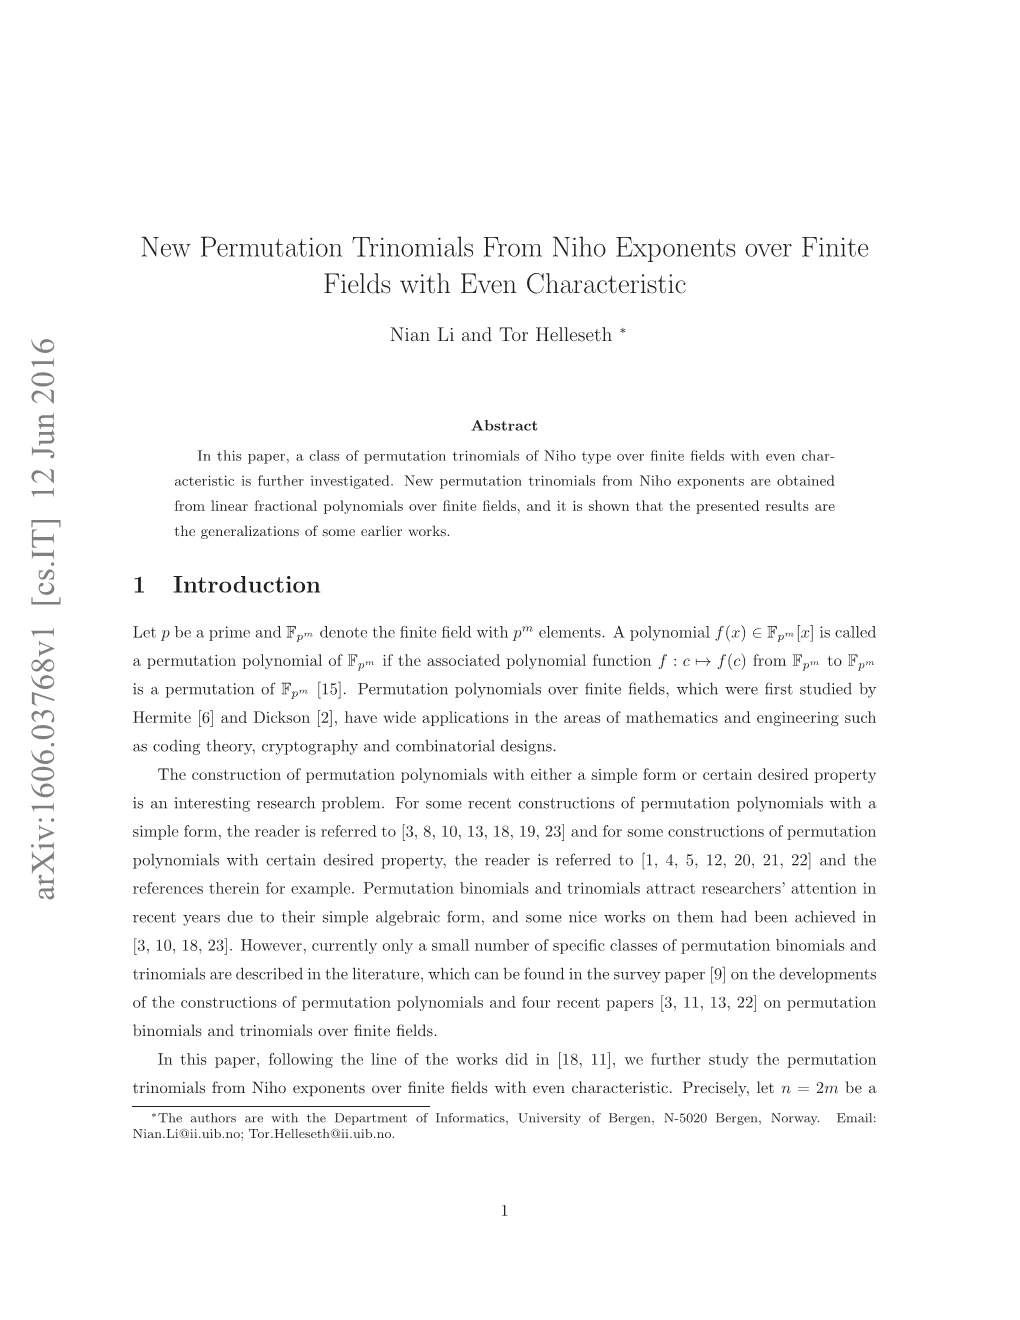 New Permutation Trinomials from Niho Exponents Over Finite Fields